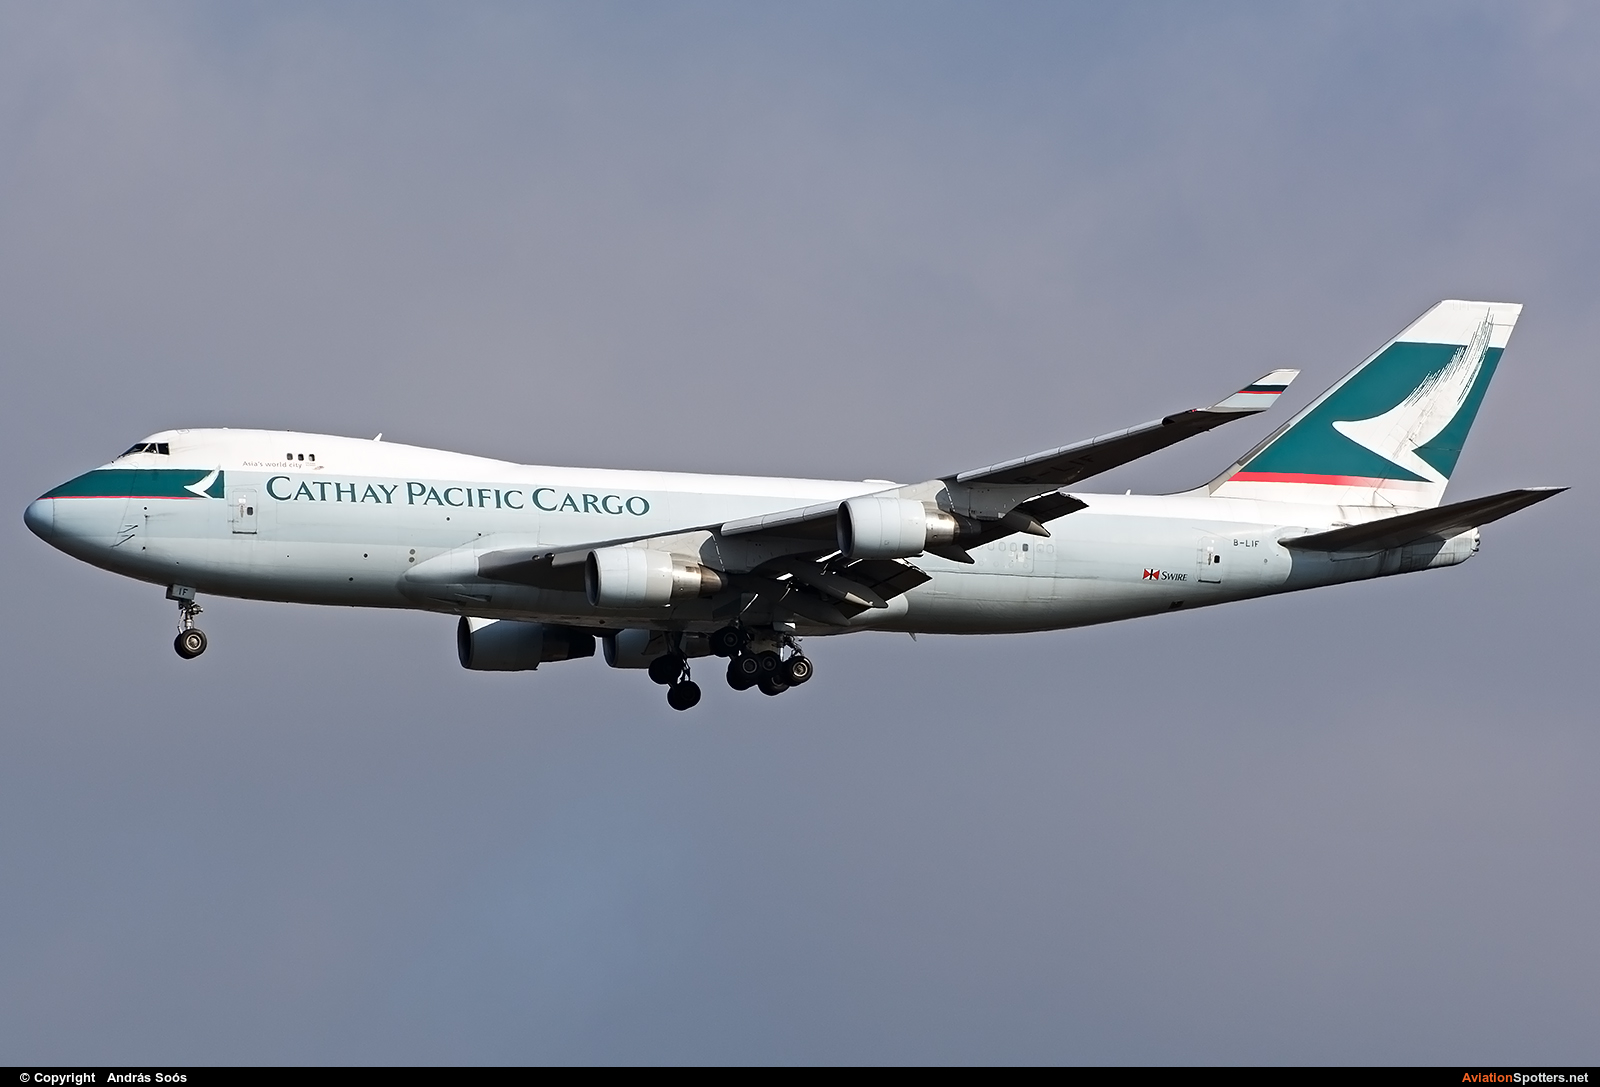 Cathay Pacific Cargo  -  747-400F  (B-LIF) By András Soós (sas1965)